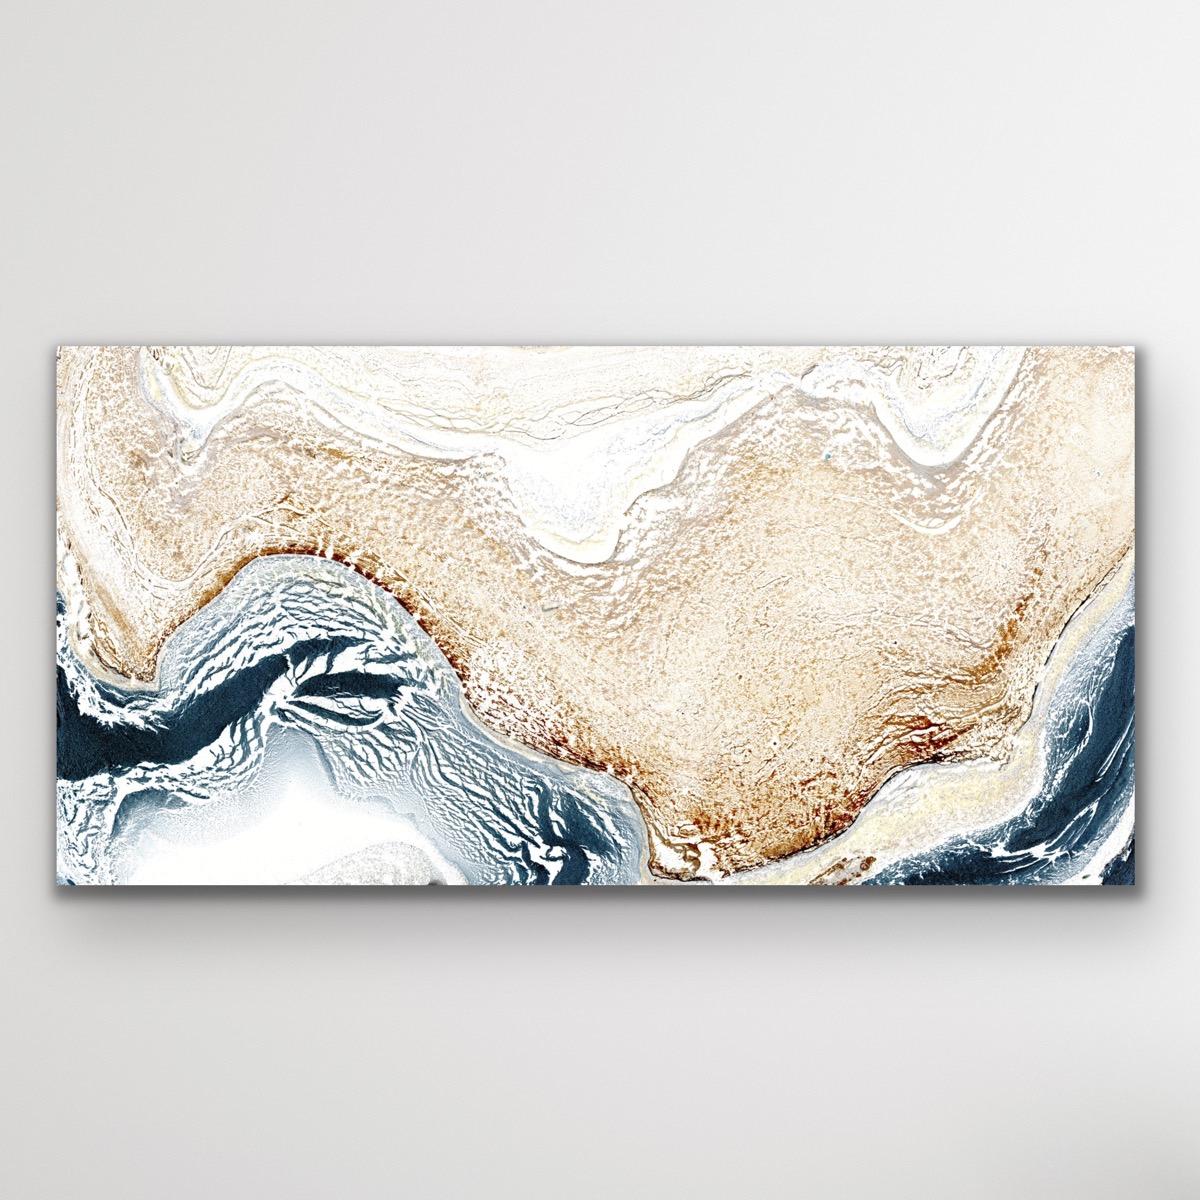 This modern abstract painting is printed on a lightweight metal composite and is suitable for indoor or outdoor decor. This open edition print of Celeste Reiter's original painting is signed by the artist. 

-Title: Diluted
-Artist: Celeste